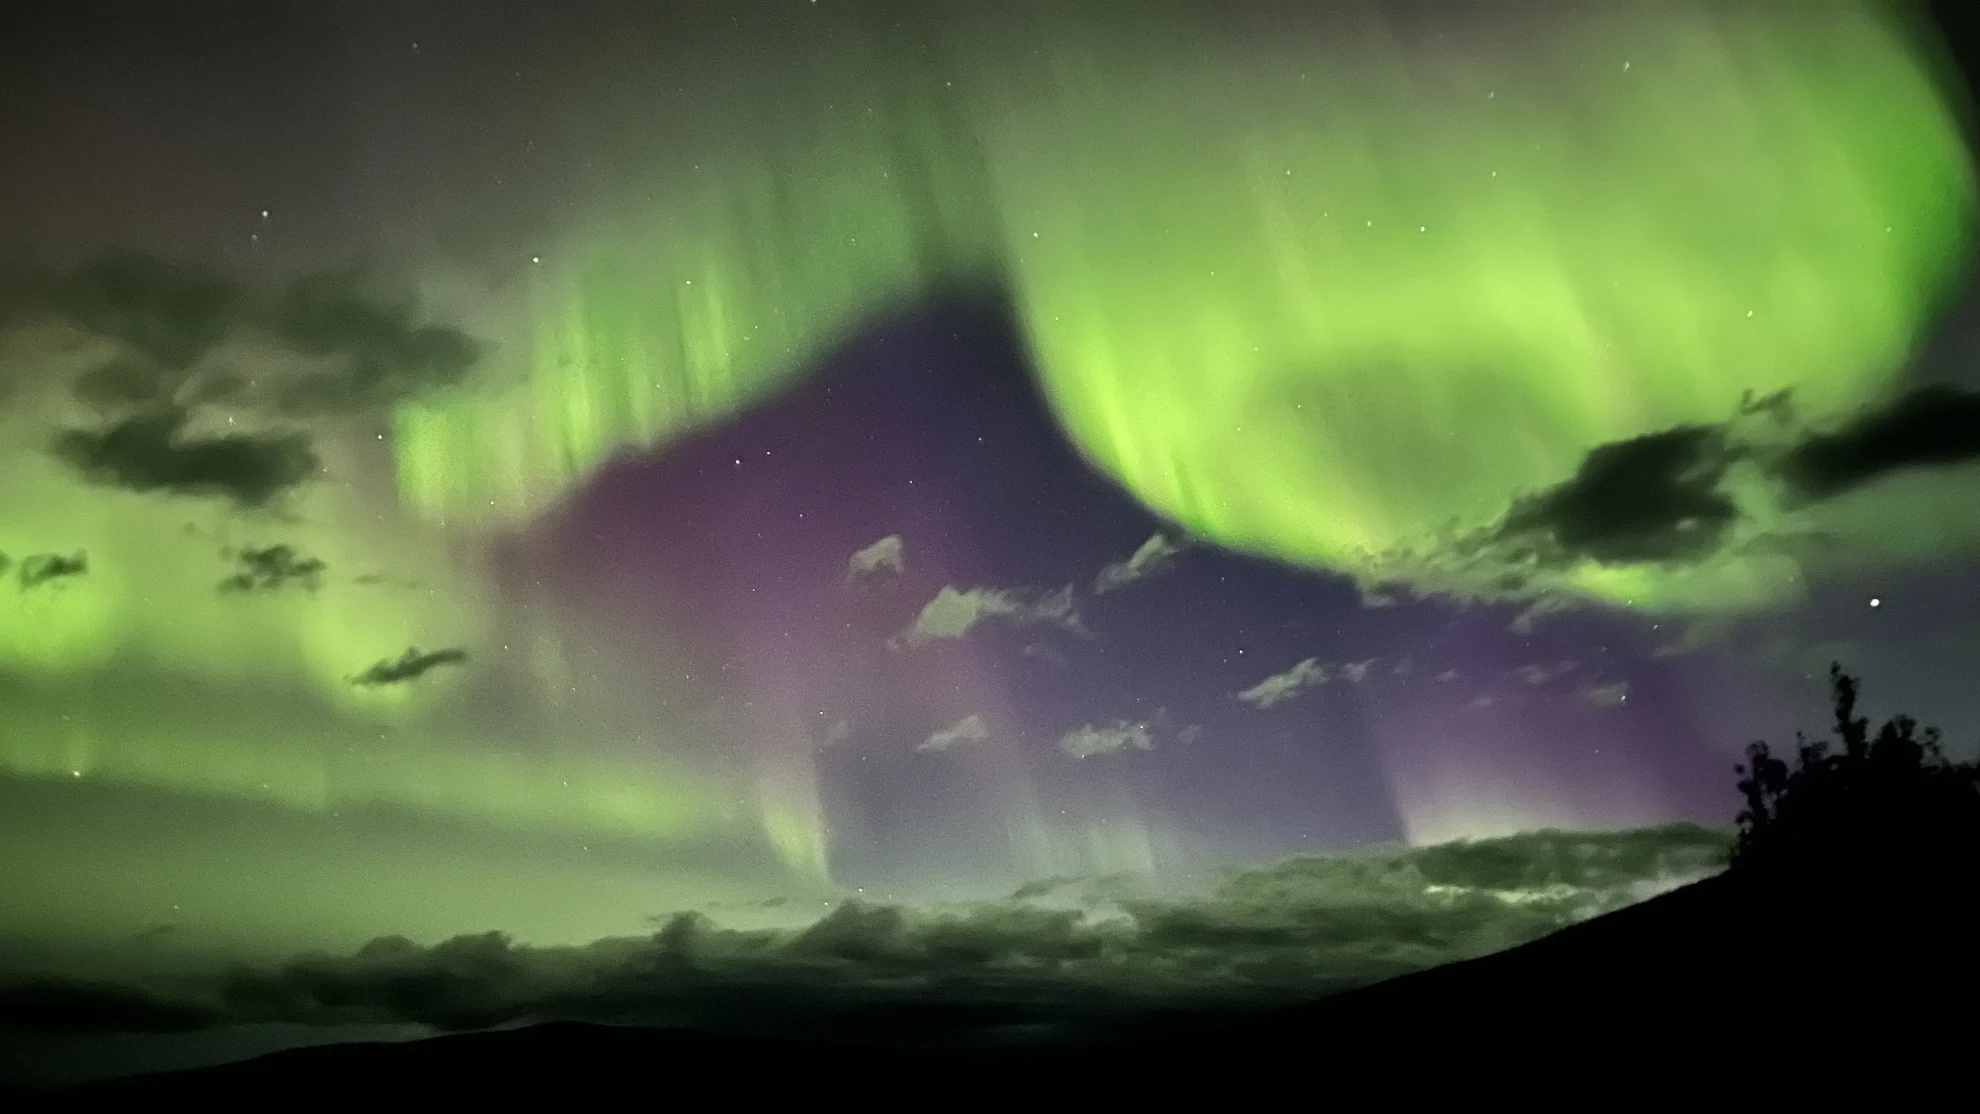 Solar max is approaching. Here’s where and how to see the Northern Lights